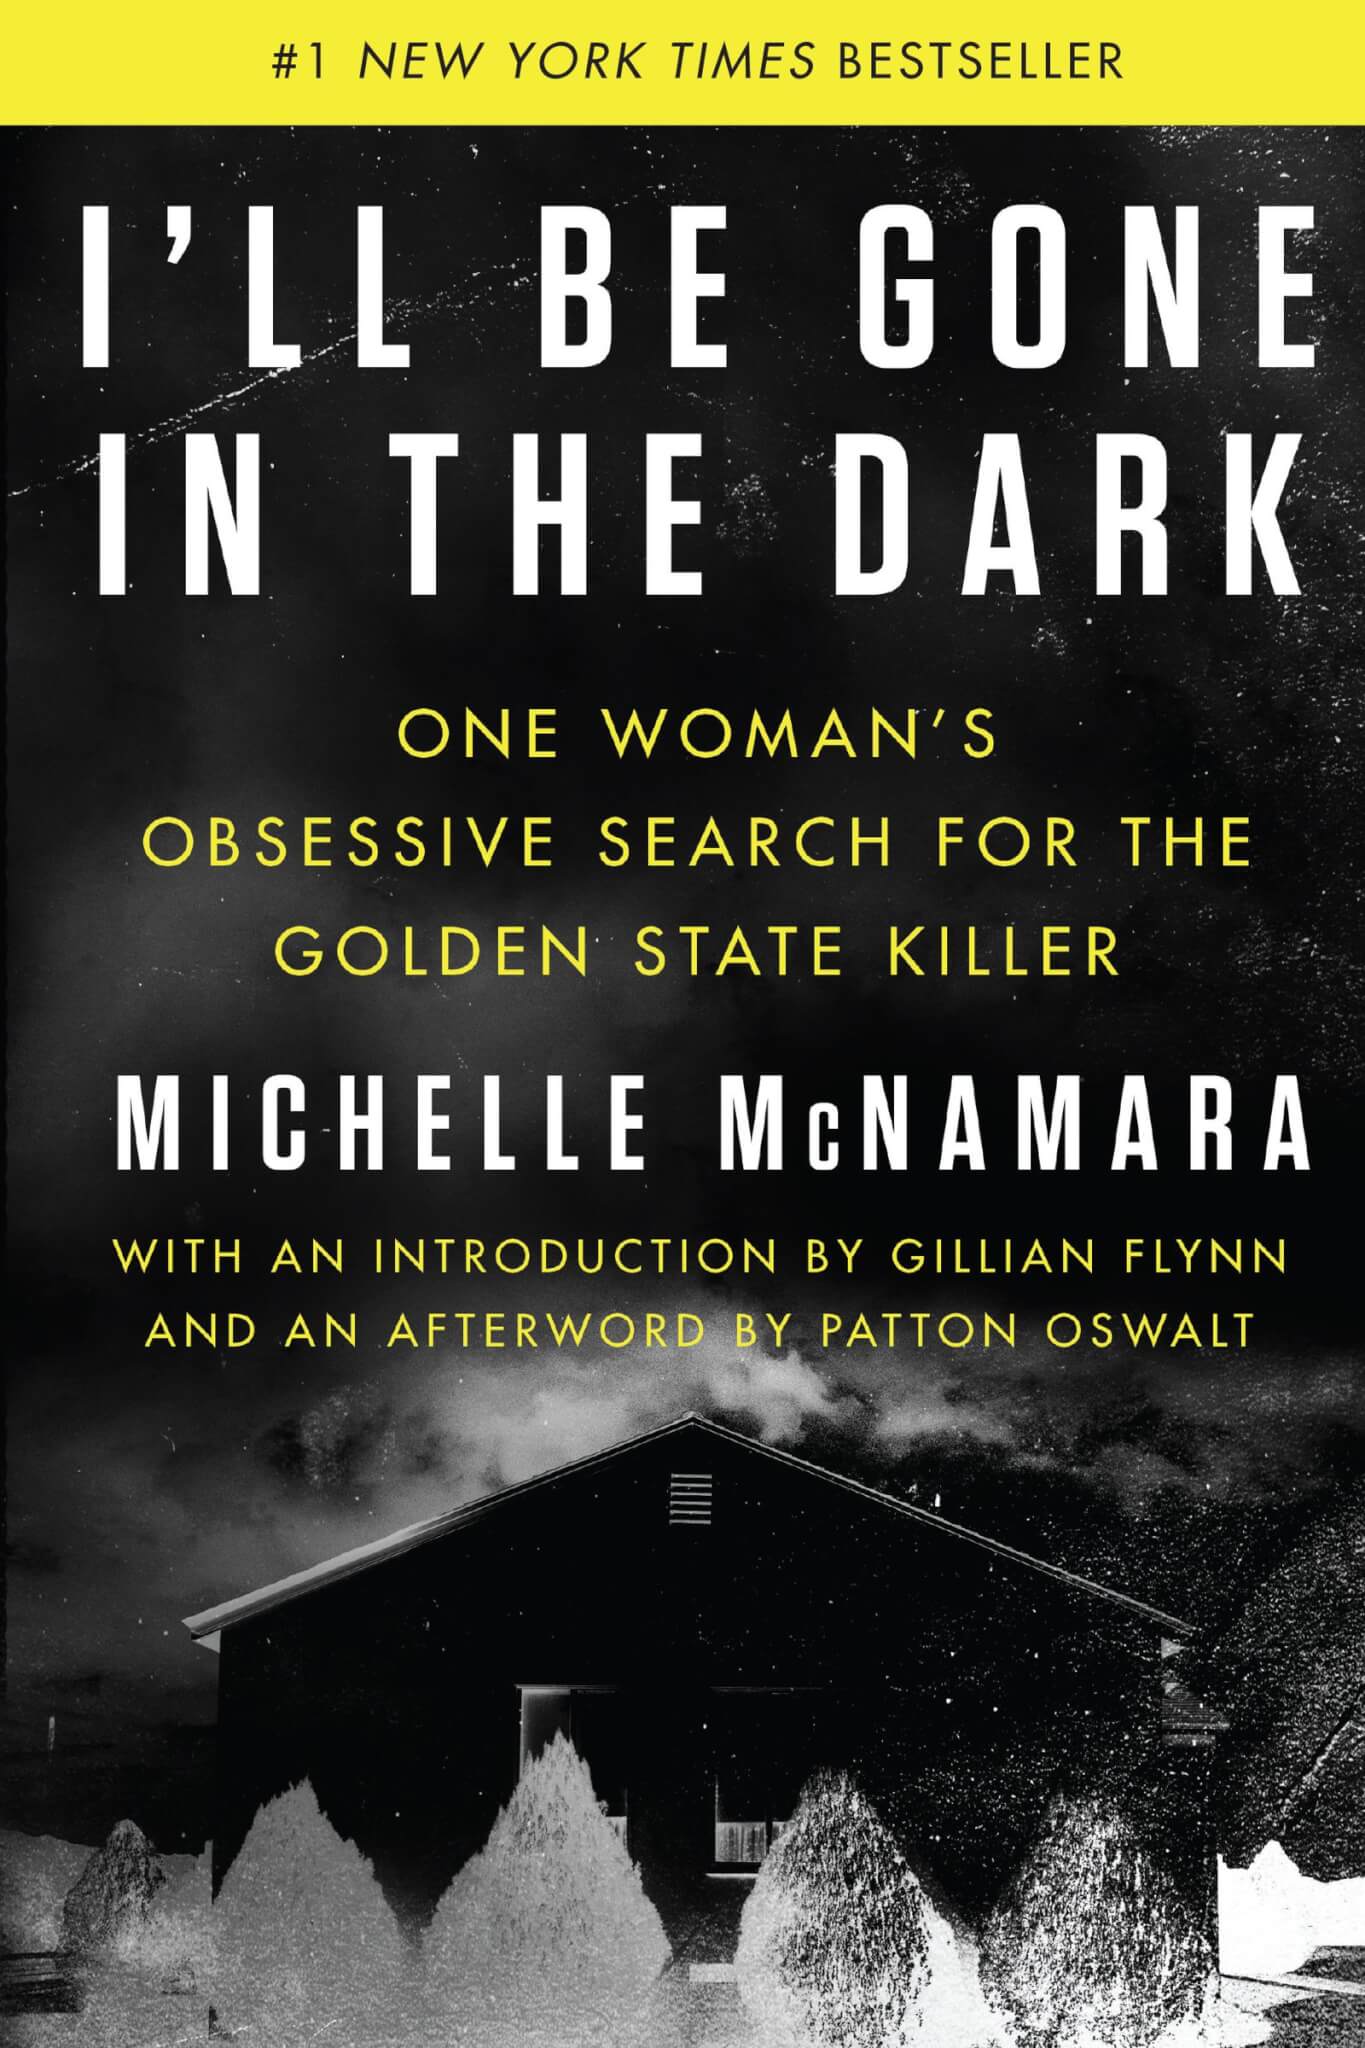 "I’ll Be Gone in the Dark: One Woman’s Obsessive Search for the Golden State Killer" by Michelle McNamara